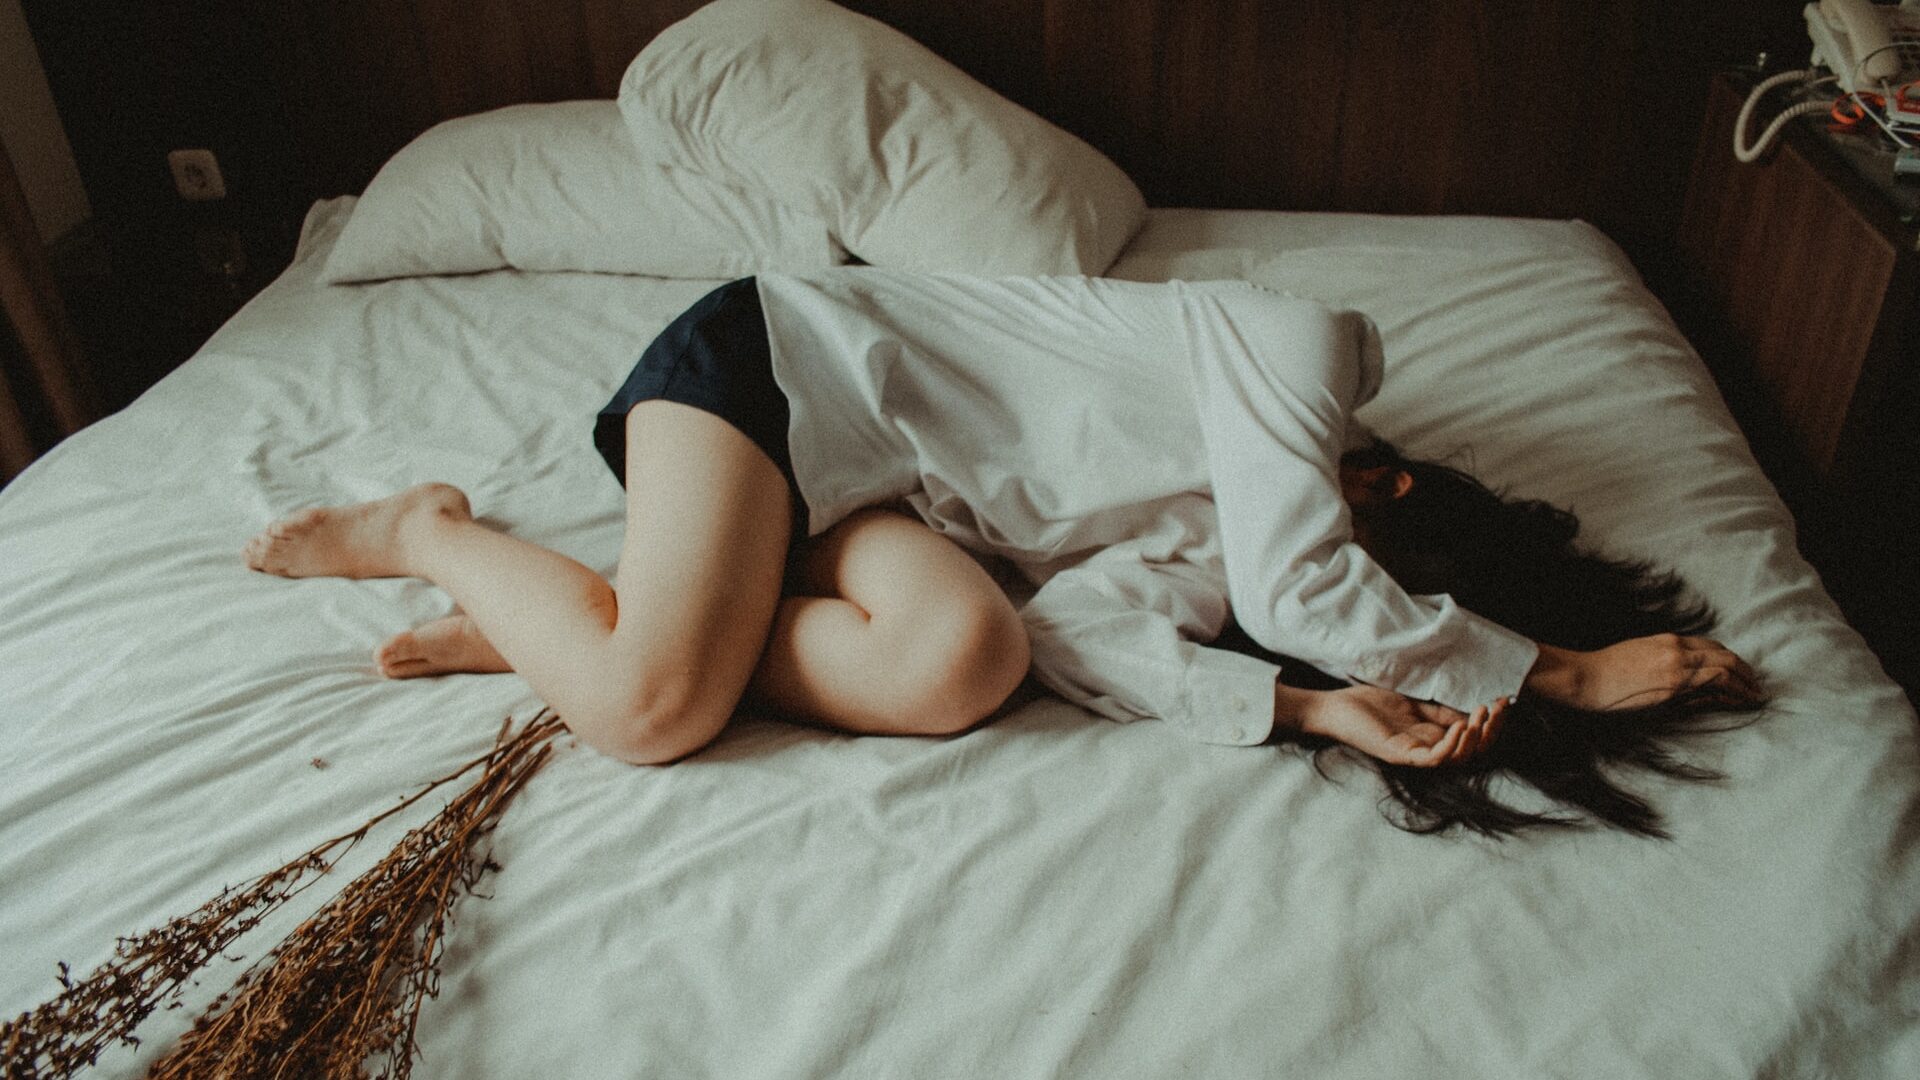 A woman lays in bed with her arms covering her face. She appears exhausted as she tries to work up the energy to get up. This could symbolize the fatigue felt from depression symptoms. We offer support with depression treatment in Cincinnati, OH, CBT for depression, and other services. Contact a depression therapist for support today!